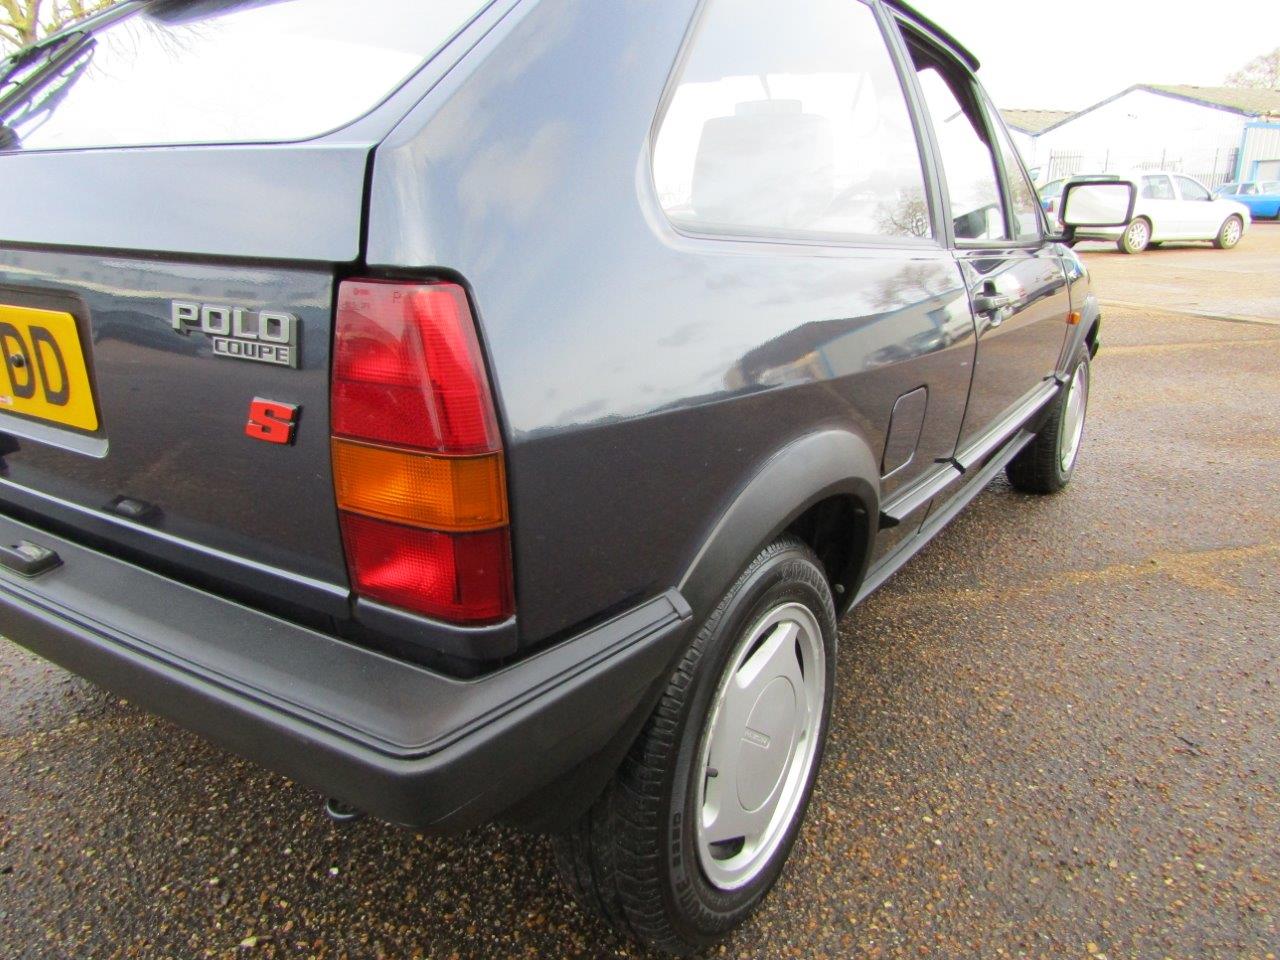 1988 VW Polo 1.3 Coupe S 39,000 miles from new - Image 8 of 26